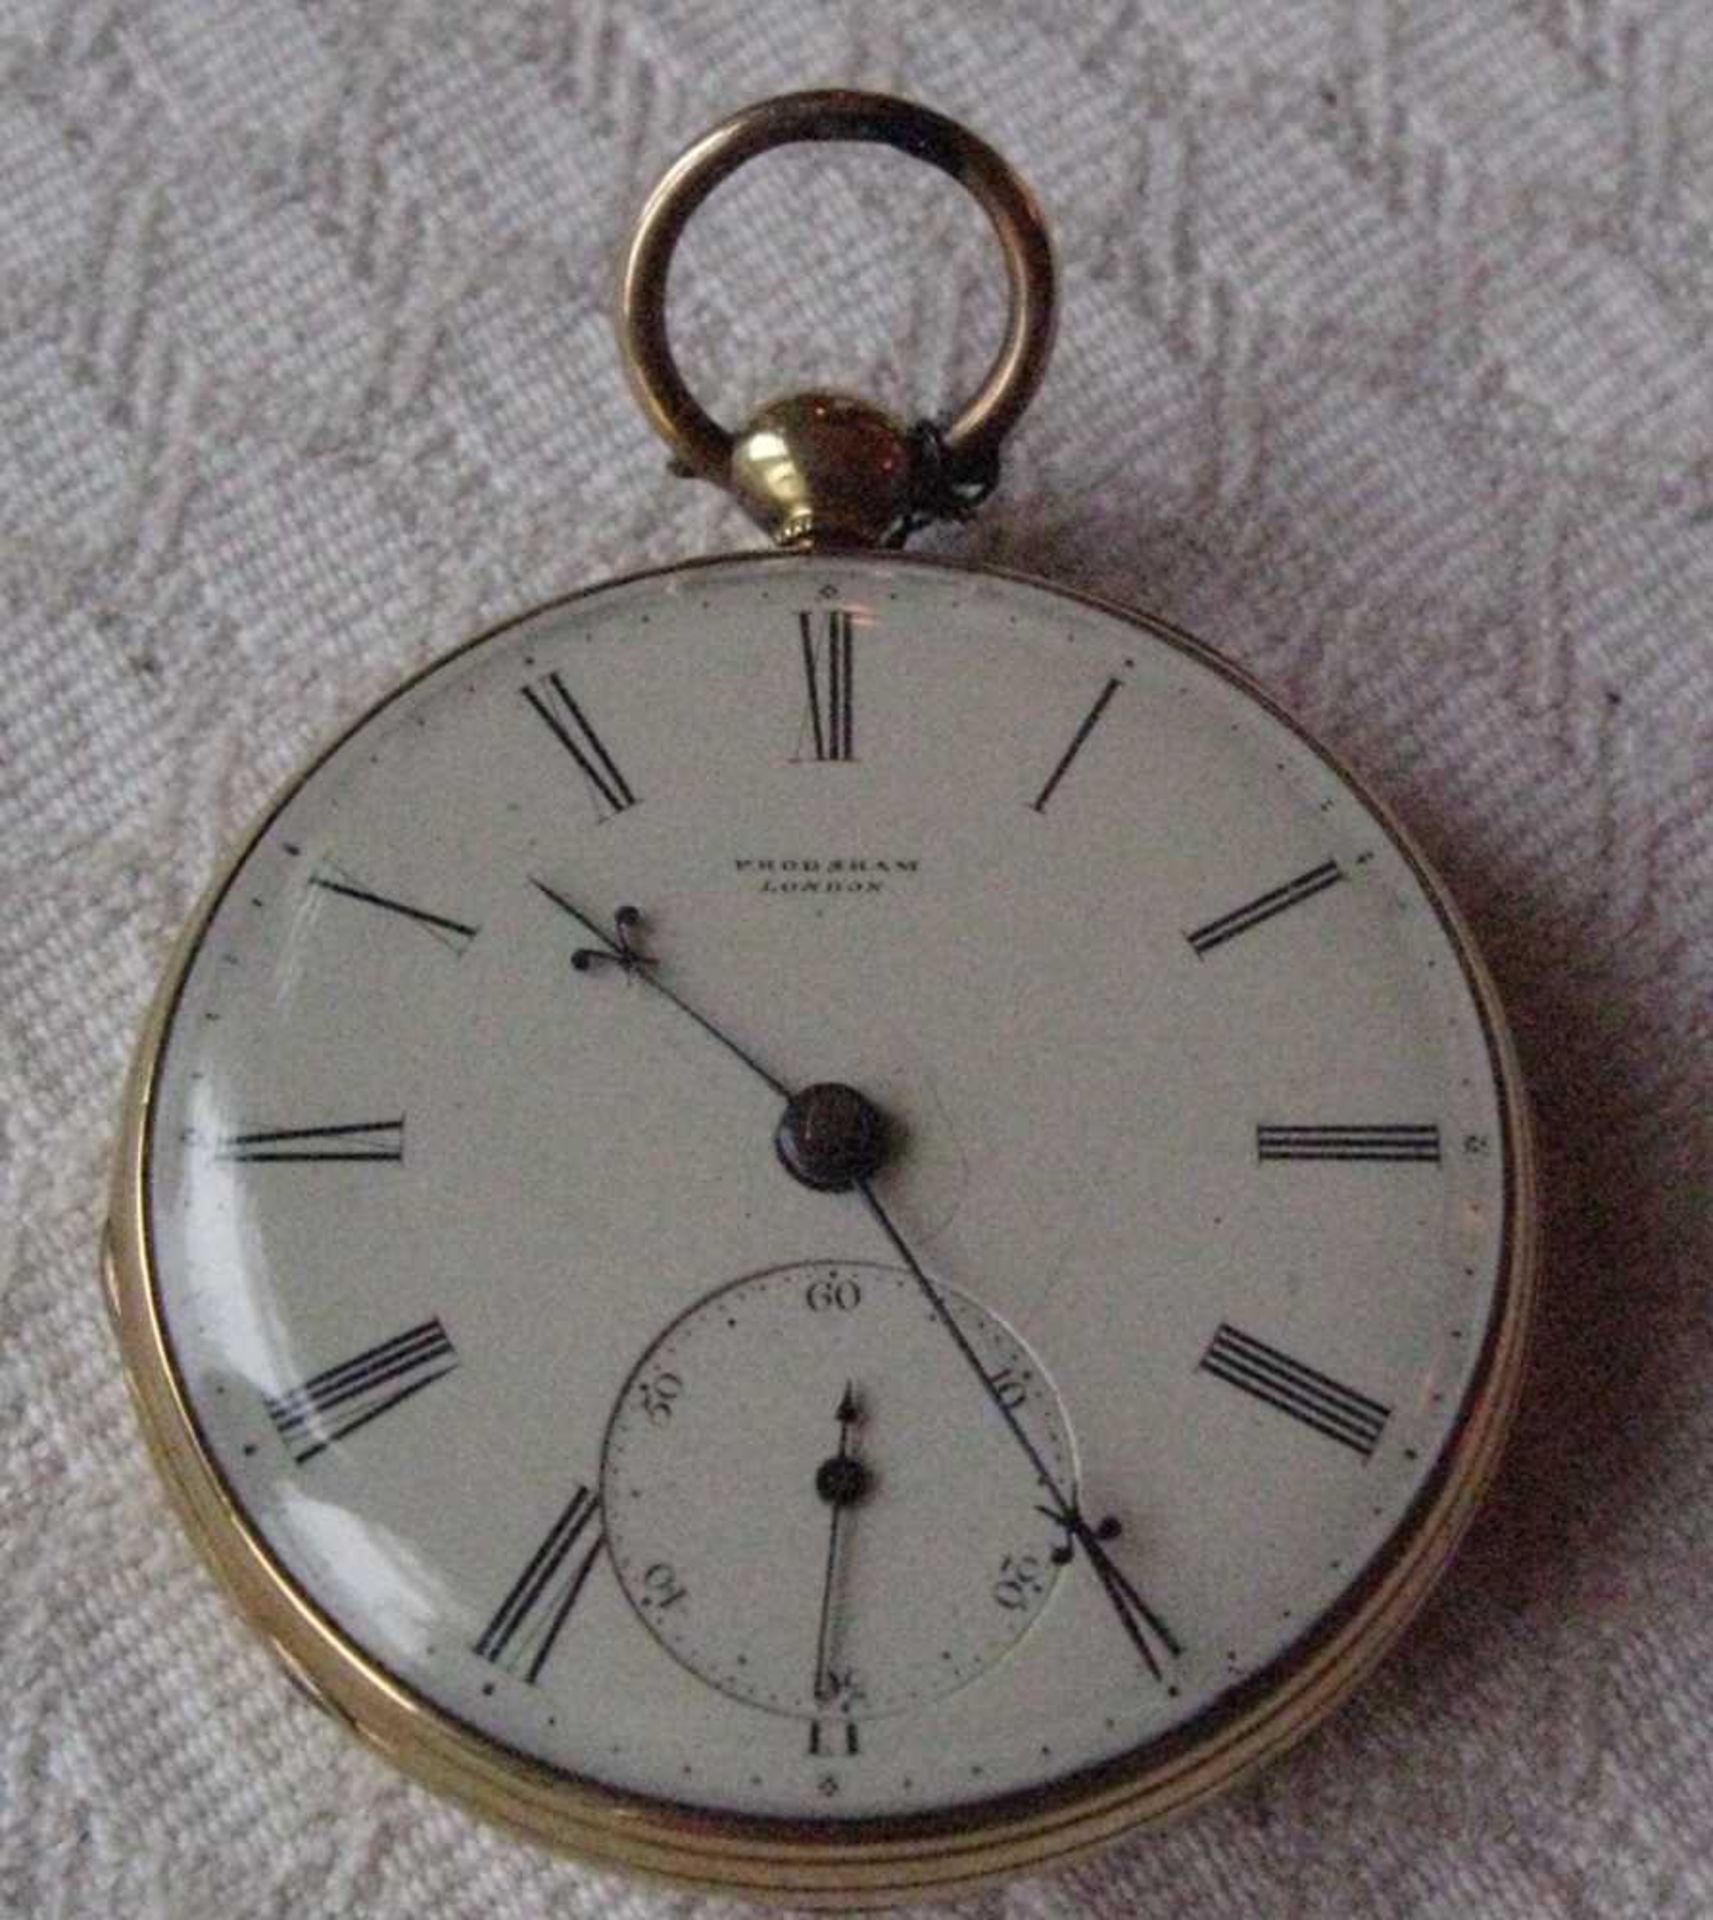 AN 18CT GOLD CASED POCKET WATCH CHARLES FRODSHAM, LONDON - Image 5 of 5